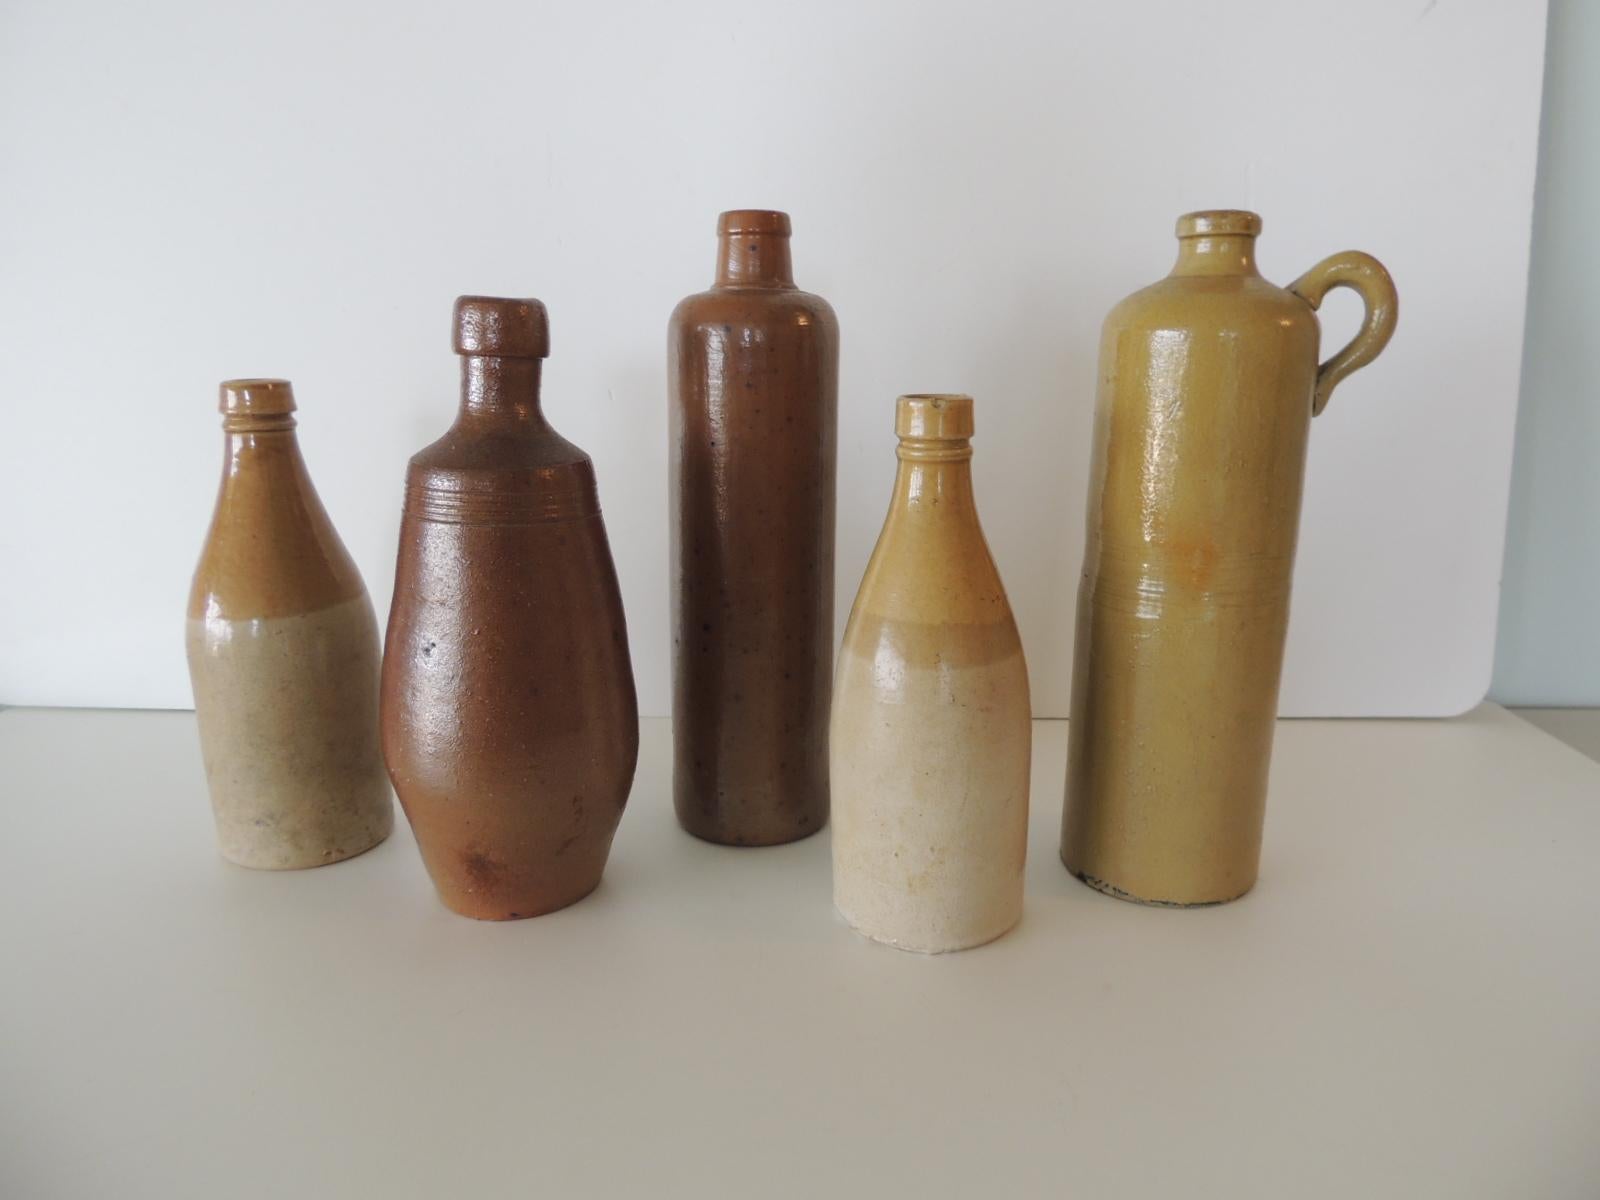 Set of '5' vintage Mid-Century Modern pottery bottles
Sizes:
From left to right
8.5